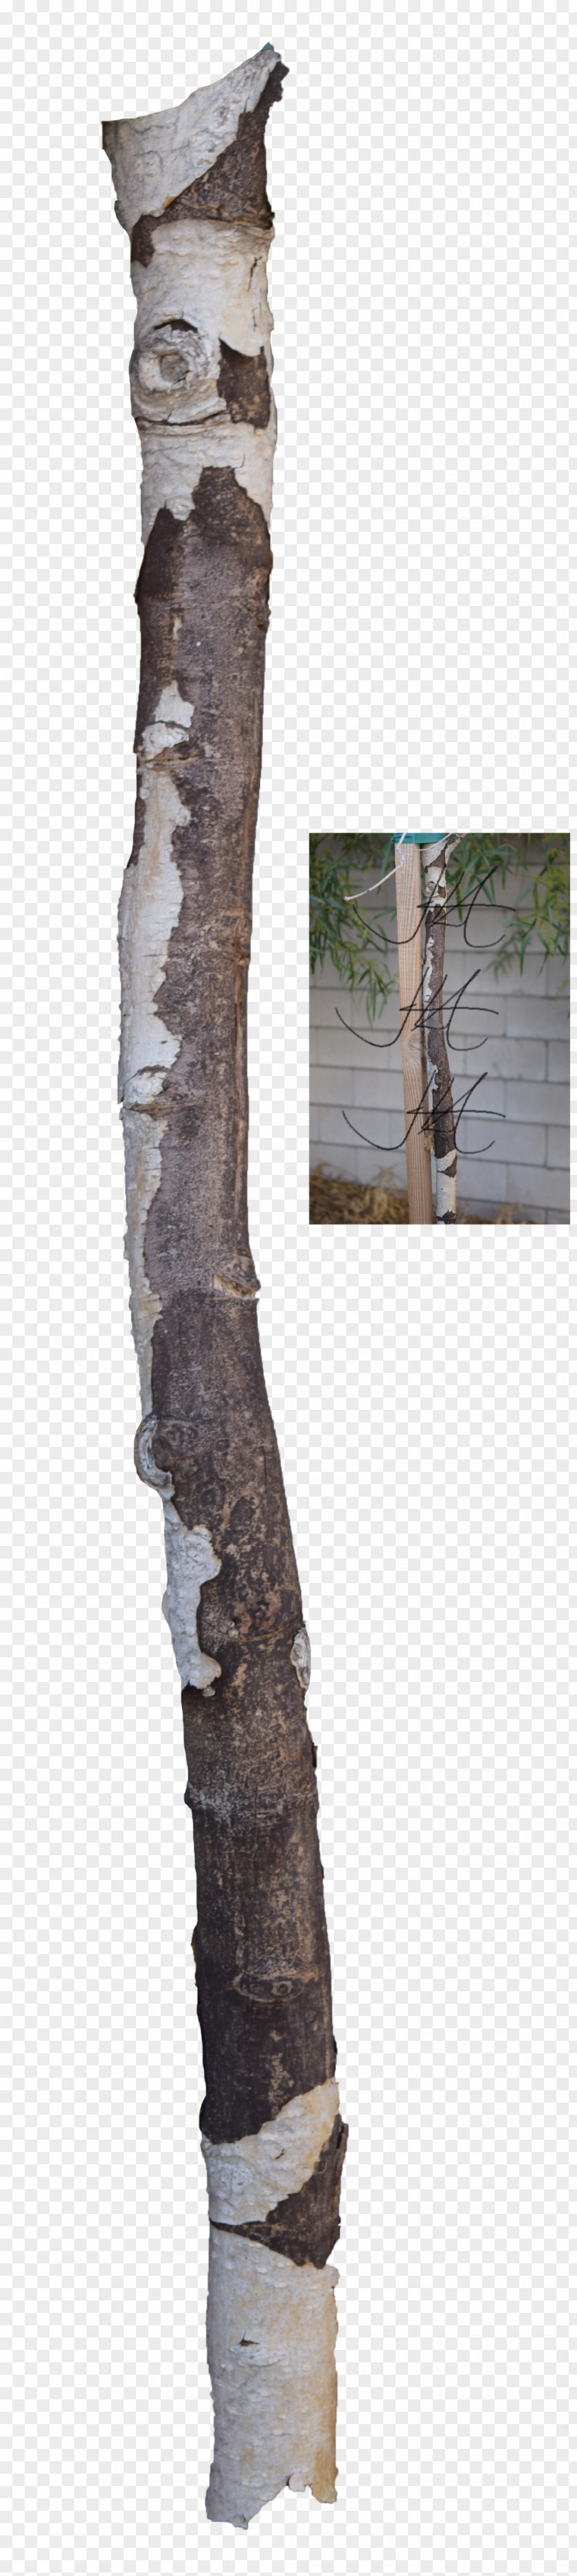 Tree Branch Trunk Wood PNG